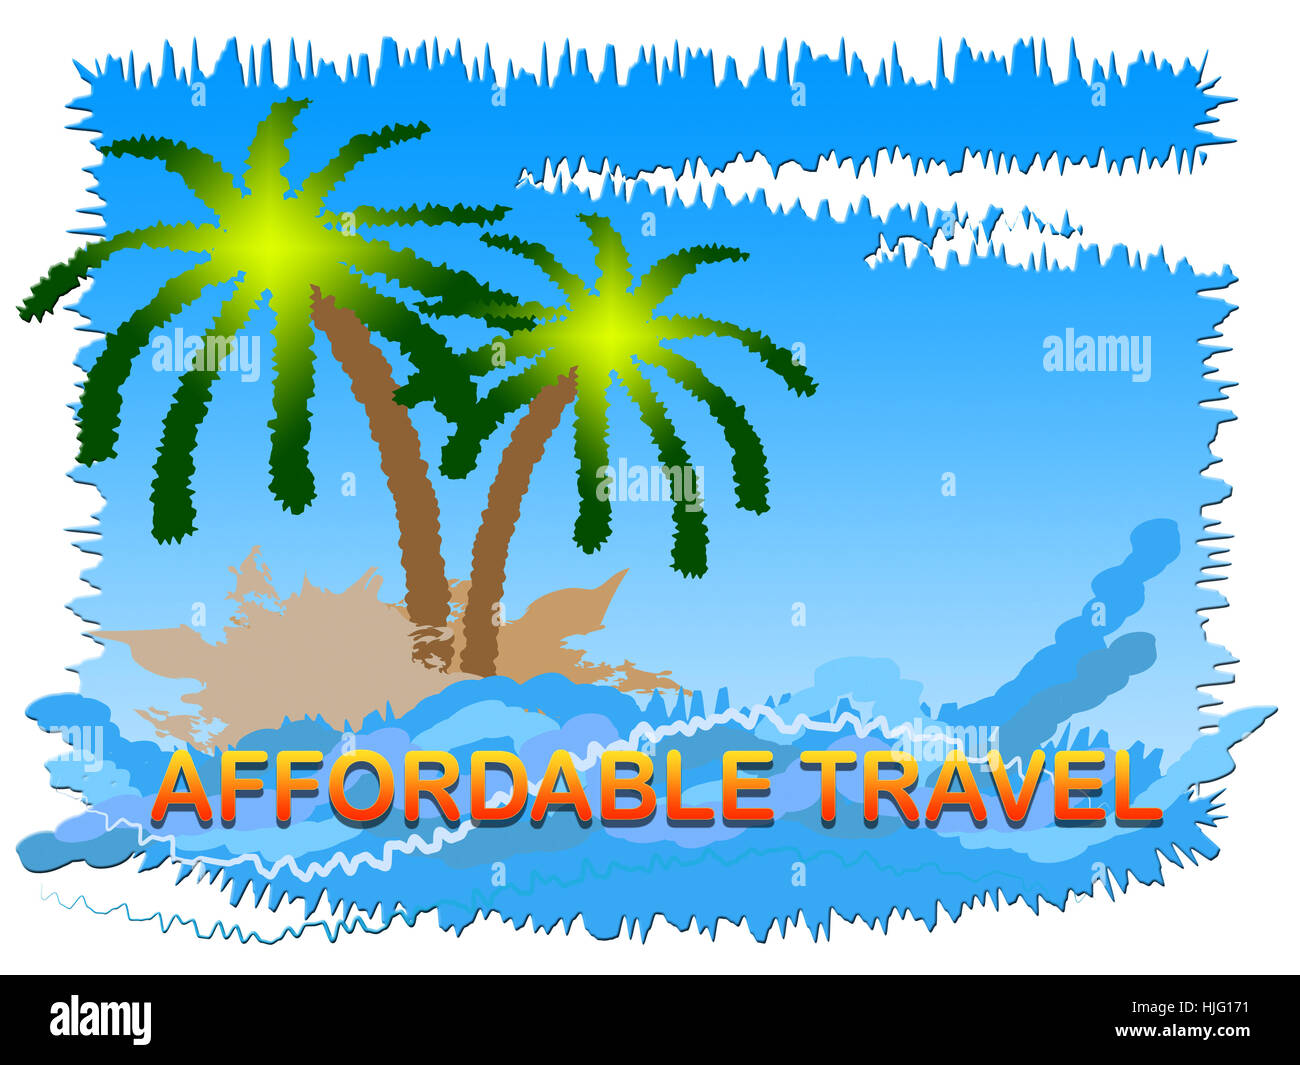 Affordable Travel Beach Scene Indicates Discount Tours And Trips Stock Photo